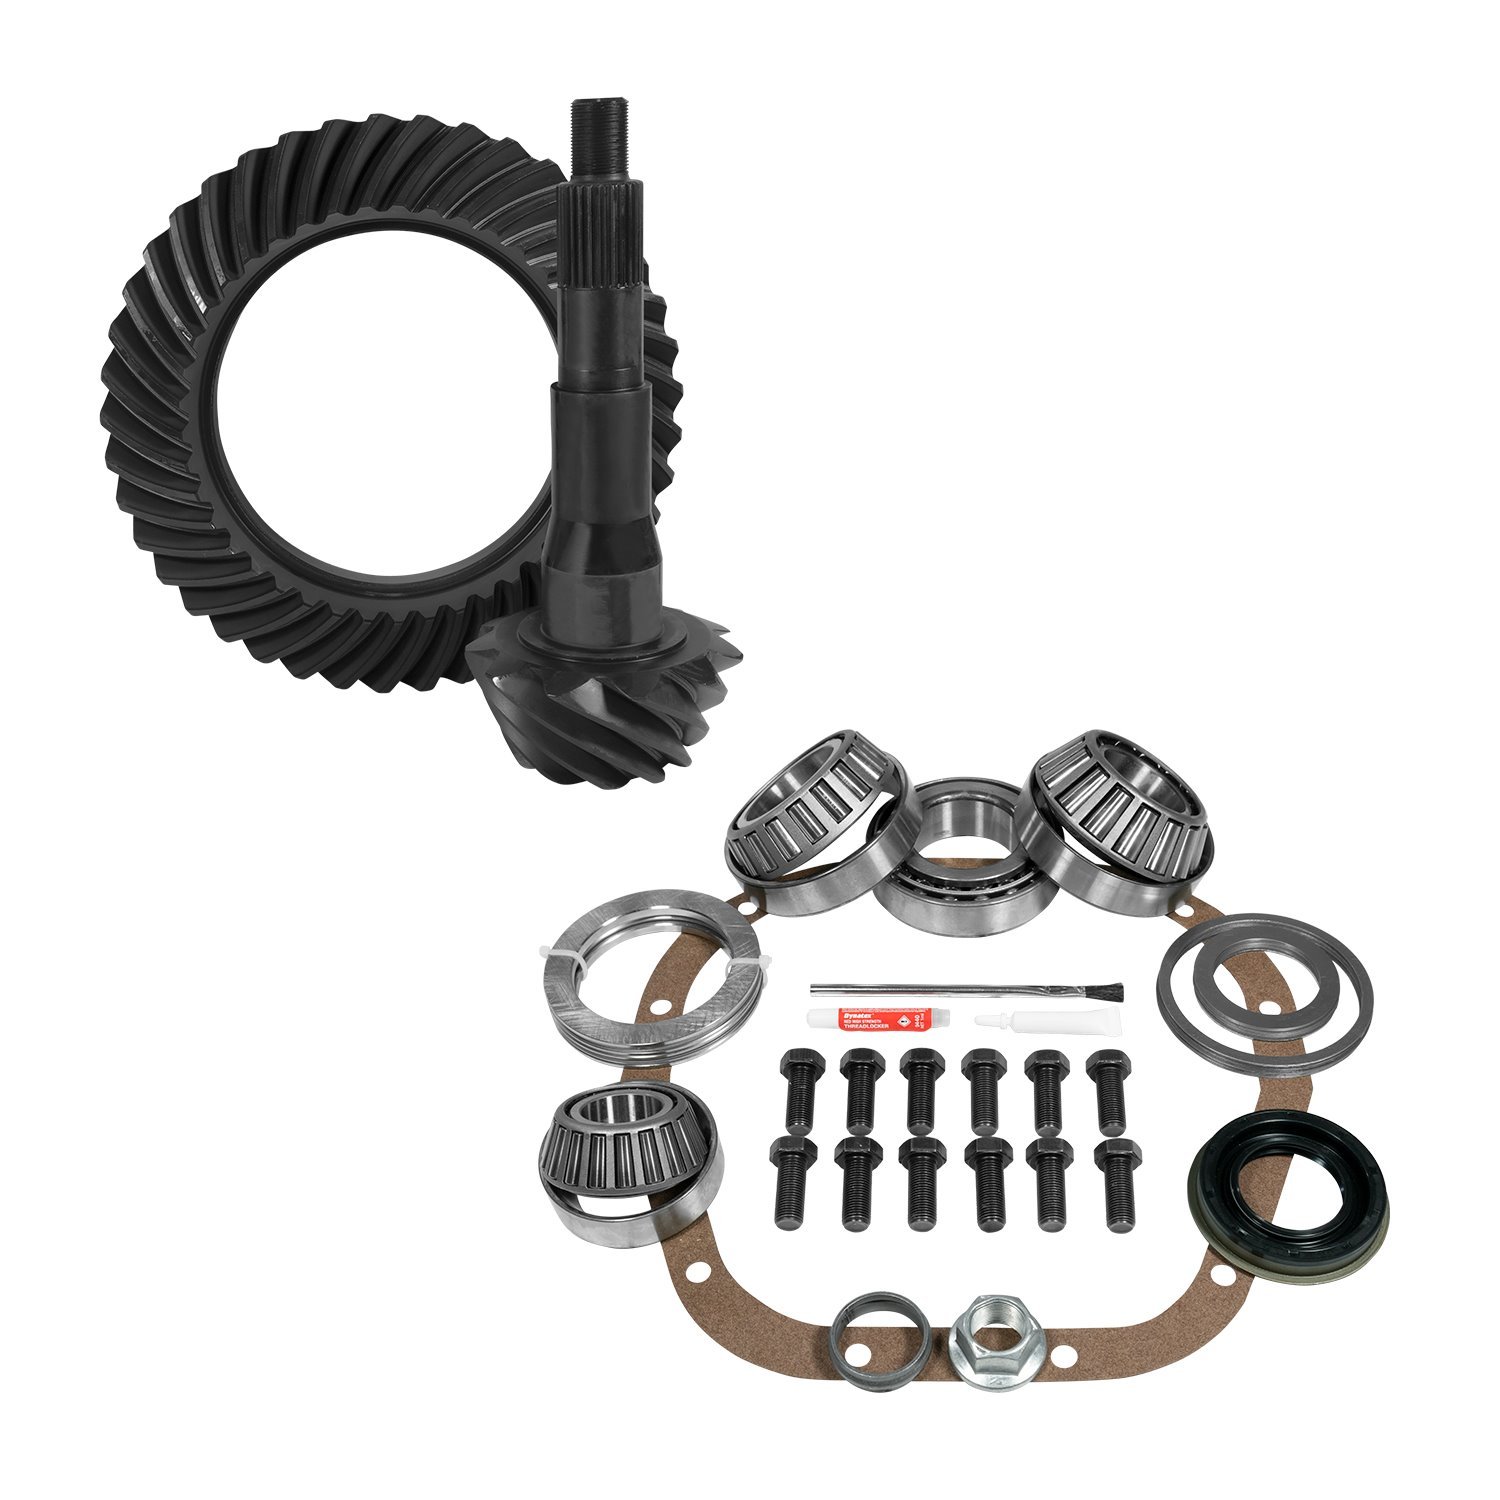 USA Standard 10851 10.5 in. Ford 4.56 Rear Ring & Pinion And Install Kit